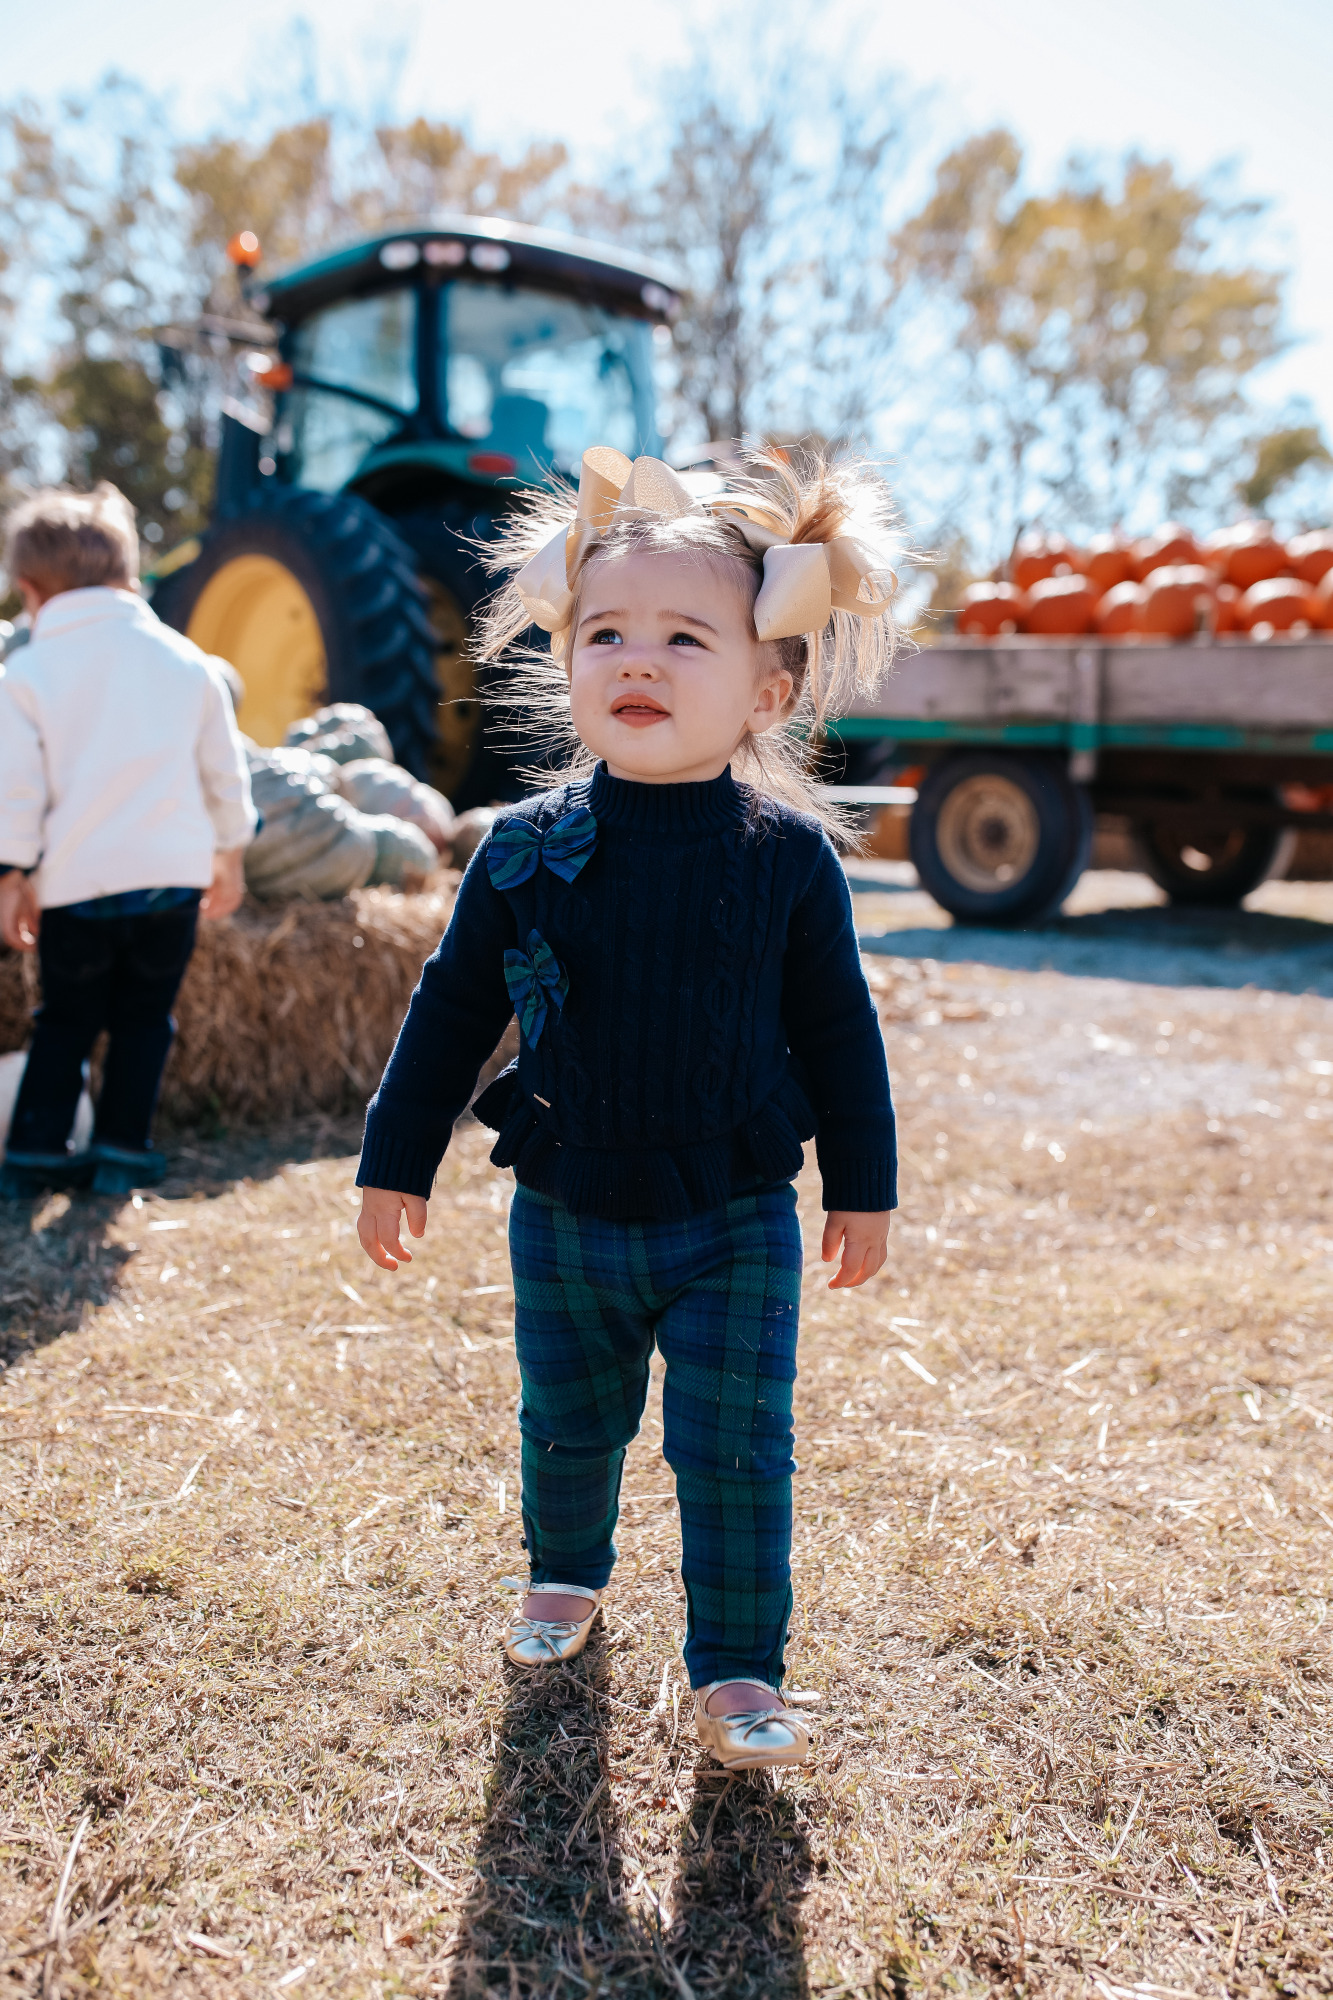 janie and jack kids clothing fall 2020, kids fall fashion 2020, the sweetest thing blog17 |janie and jack kids clothing fall 2020, kids fall fashion 2020, the sweetest thing blog17 | Janie and Jack Kids Clothing by popular US fashion blog, The Sweetest Thing: image of two kids sitting next to a pile of pumpkins and wearing a Janie and Jack PLAID POPLIN SHIRT, Janie and Jack SHAWL COLLAR PULLOVER, Janie and Jack SLIM SELVEDGE JEAN IN MOONLIGHT INDIGO WASH, Janie and Jack LEATHER TRIM BELT, Janie and Jack ARGYLE SOCK, Janie and Jack SUEDE DRIVING SHOE, Janie and Jack PEPLUM BOW SWEATER, Janie and Jack PLAID PONTE BUTTON CUFF PANT, and Janie and Jack METALLIC BOW FLAT.